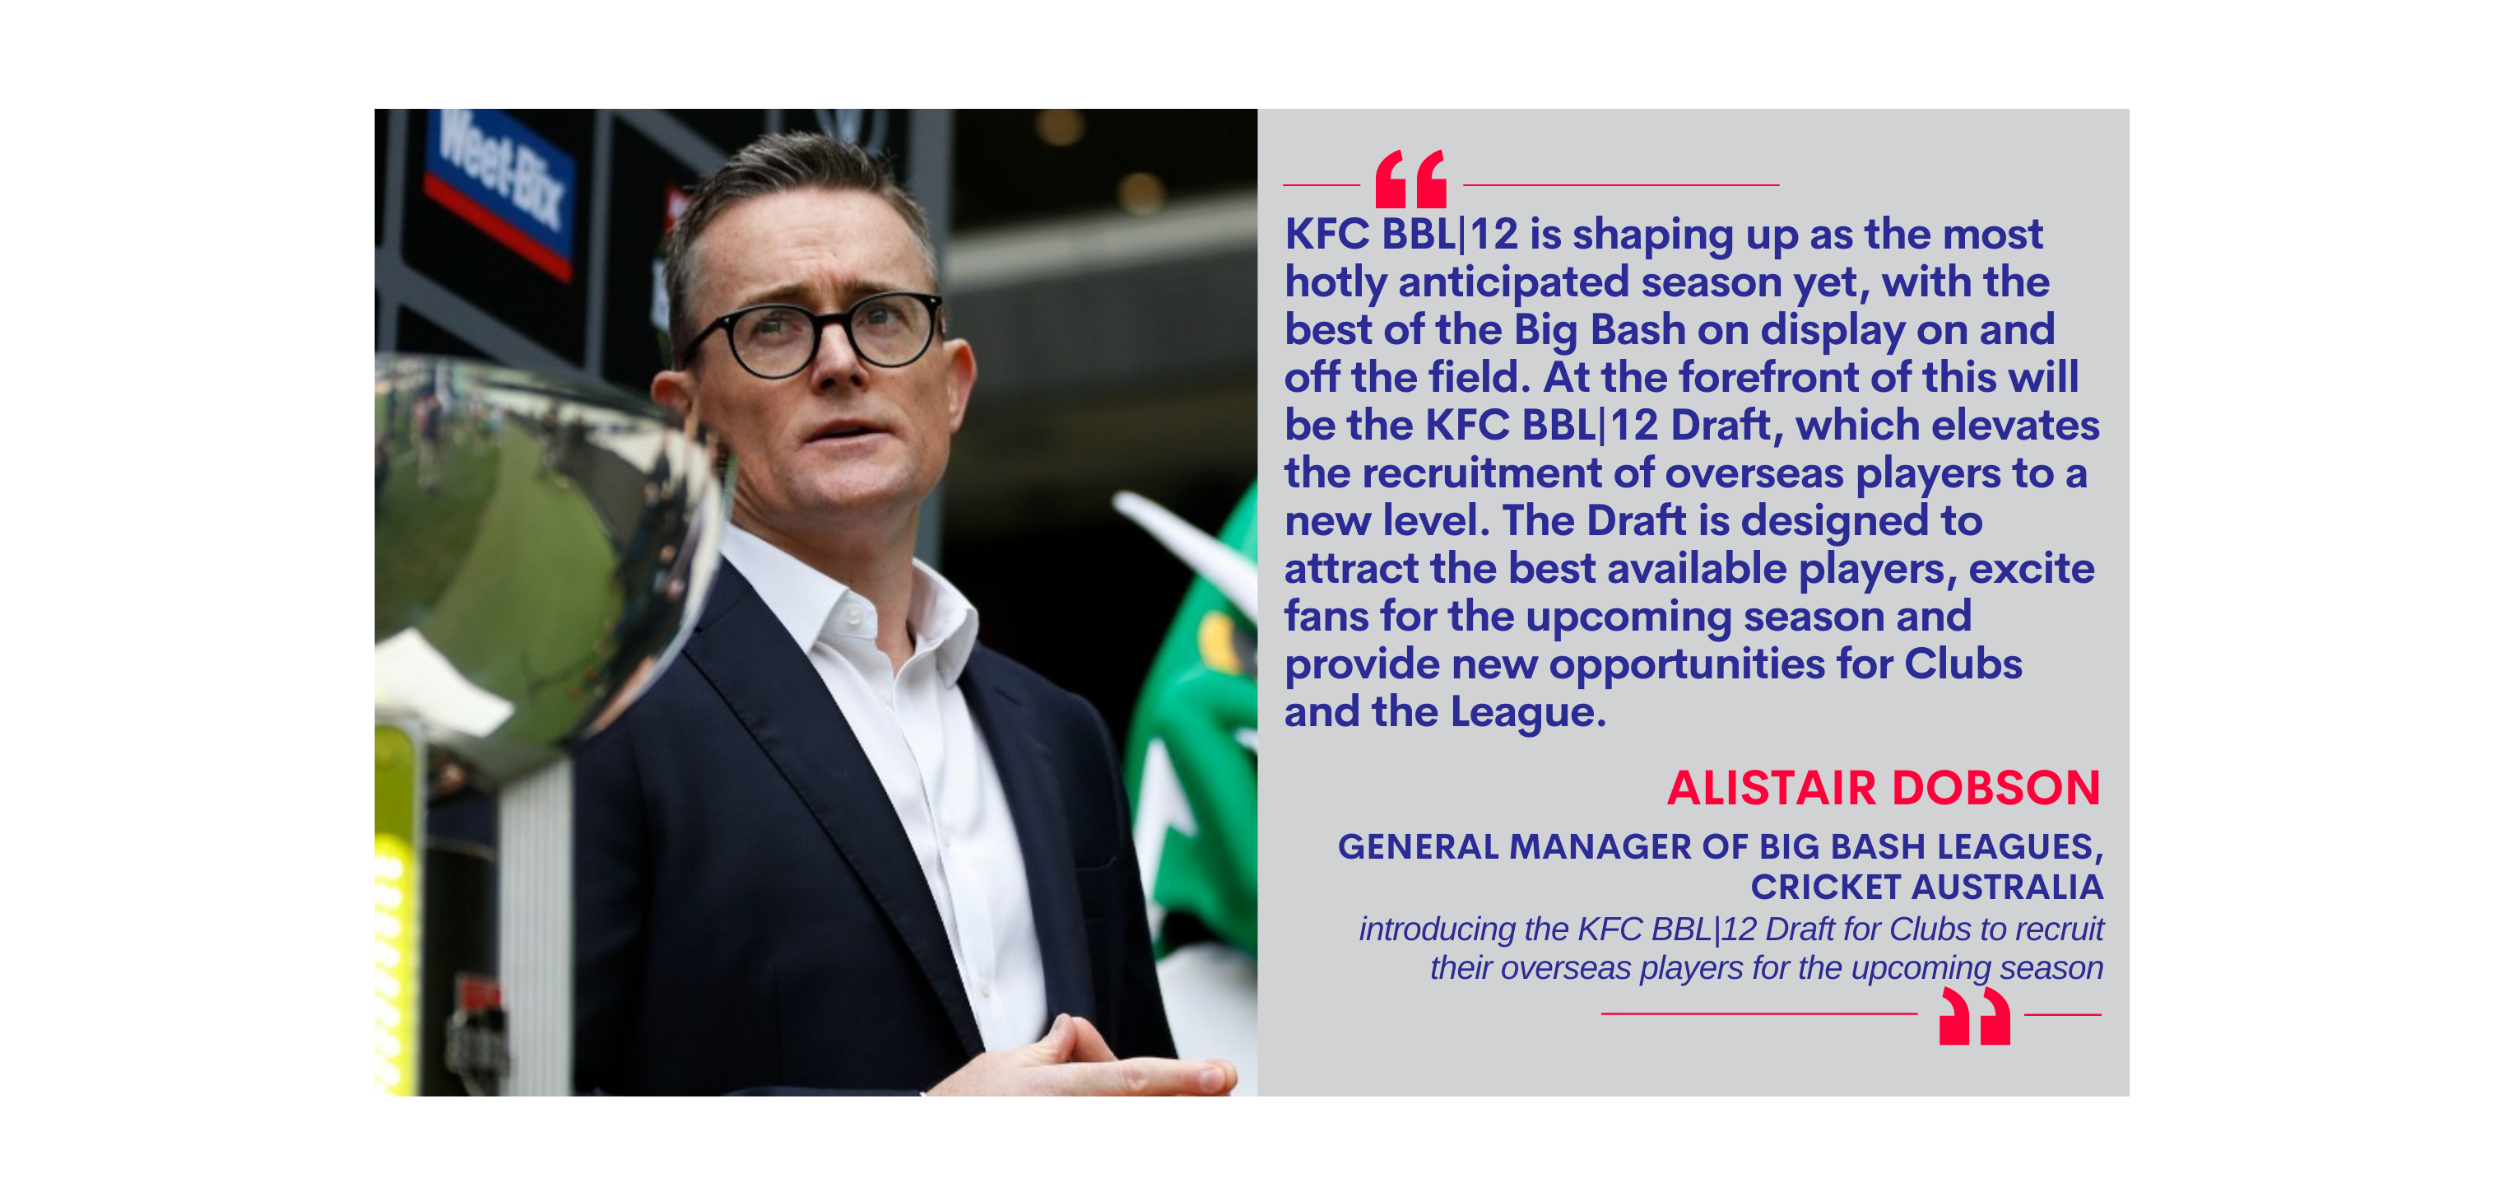 Alistair Dobson, General Manager of Big Bash Leagues, Cricket Australia introducing the KFC BBL|12 Draft for Clubs to recruit their overseas players for the upcoming season